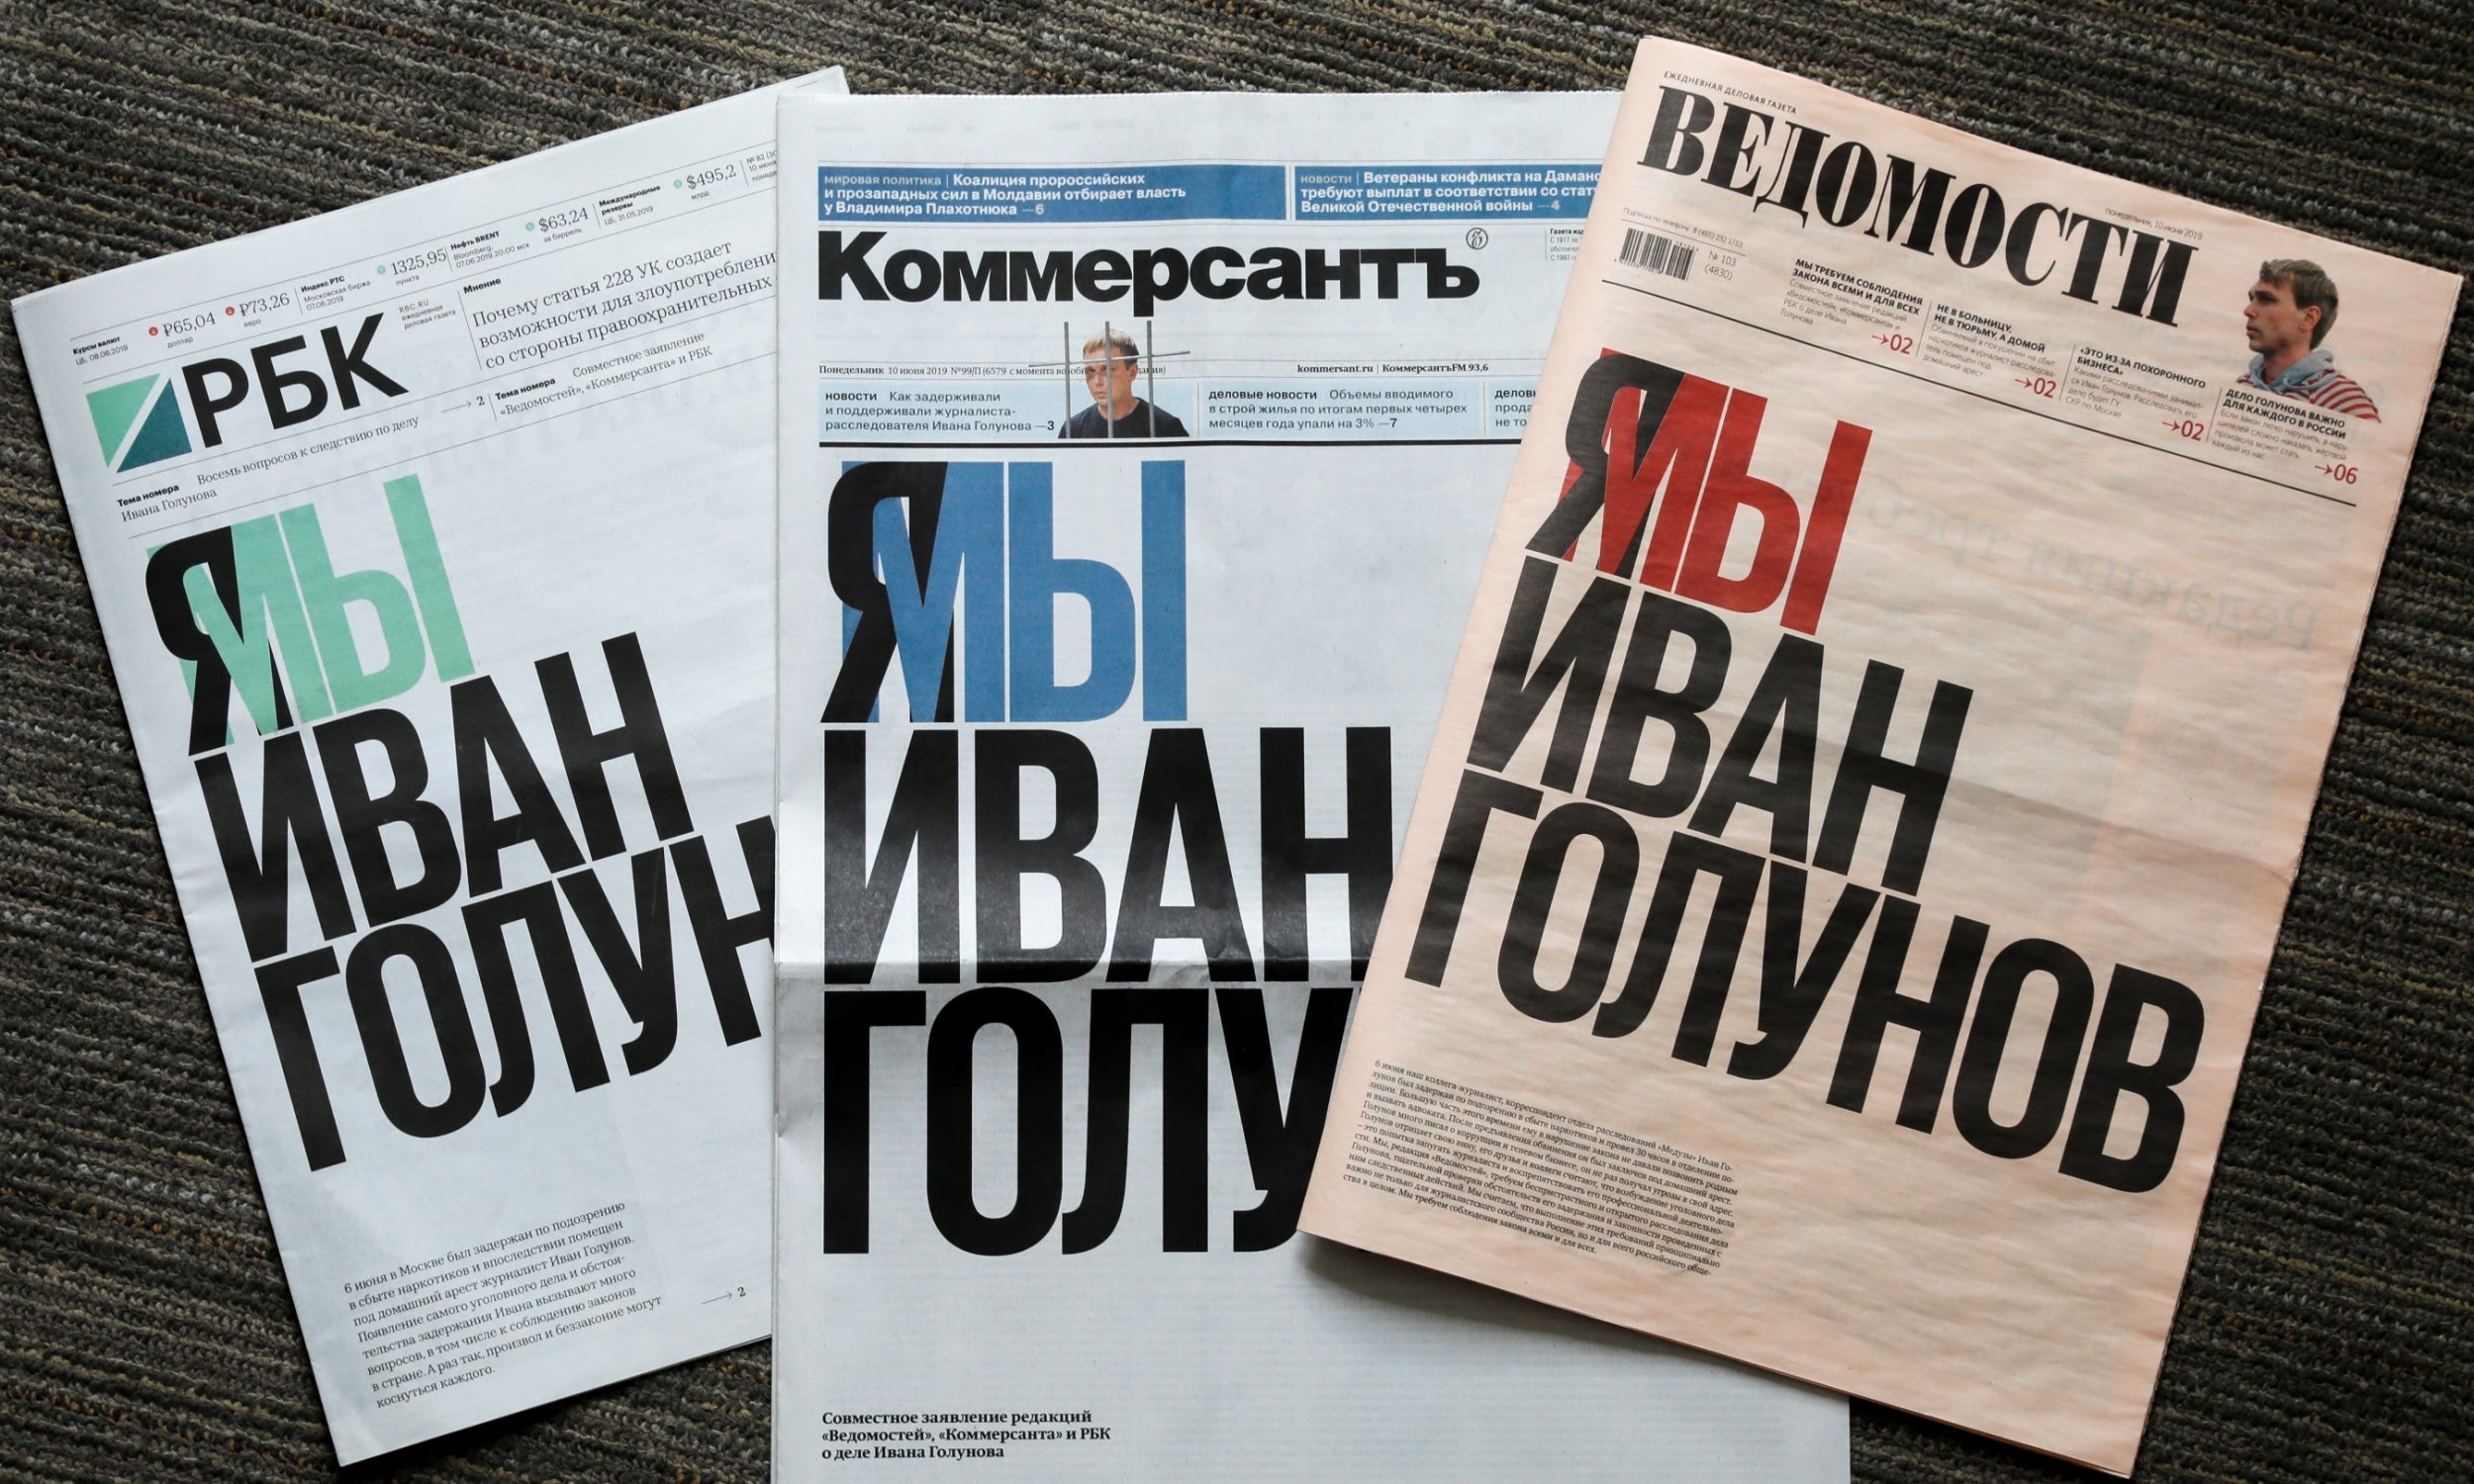 Russia’s leading newspapers publish same front page in support of detained journalist Ivan Golunov